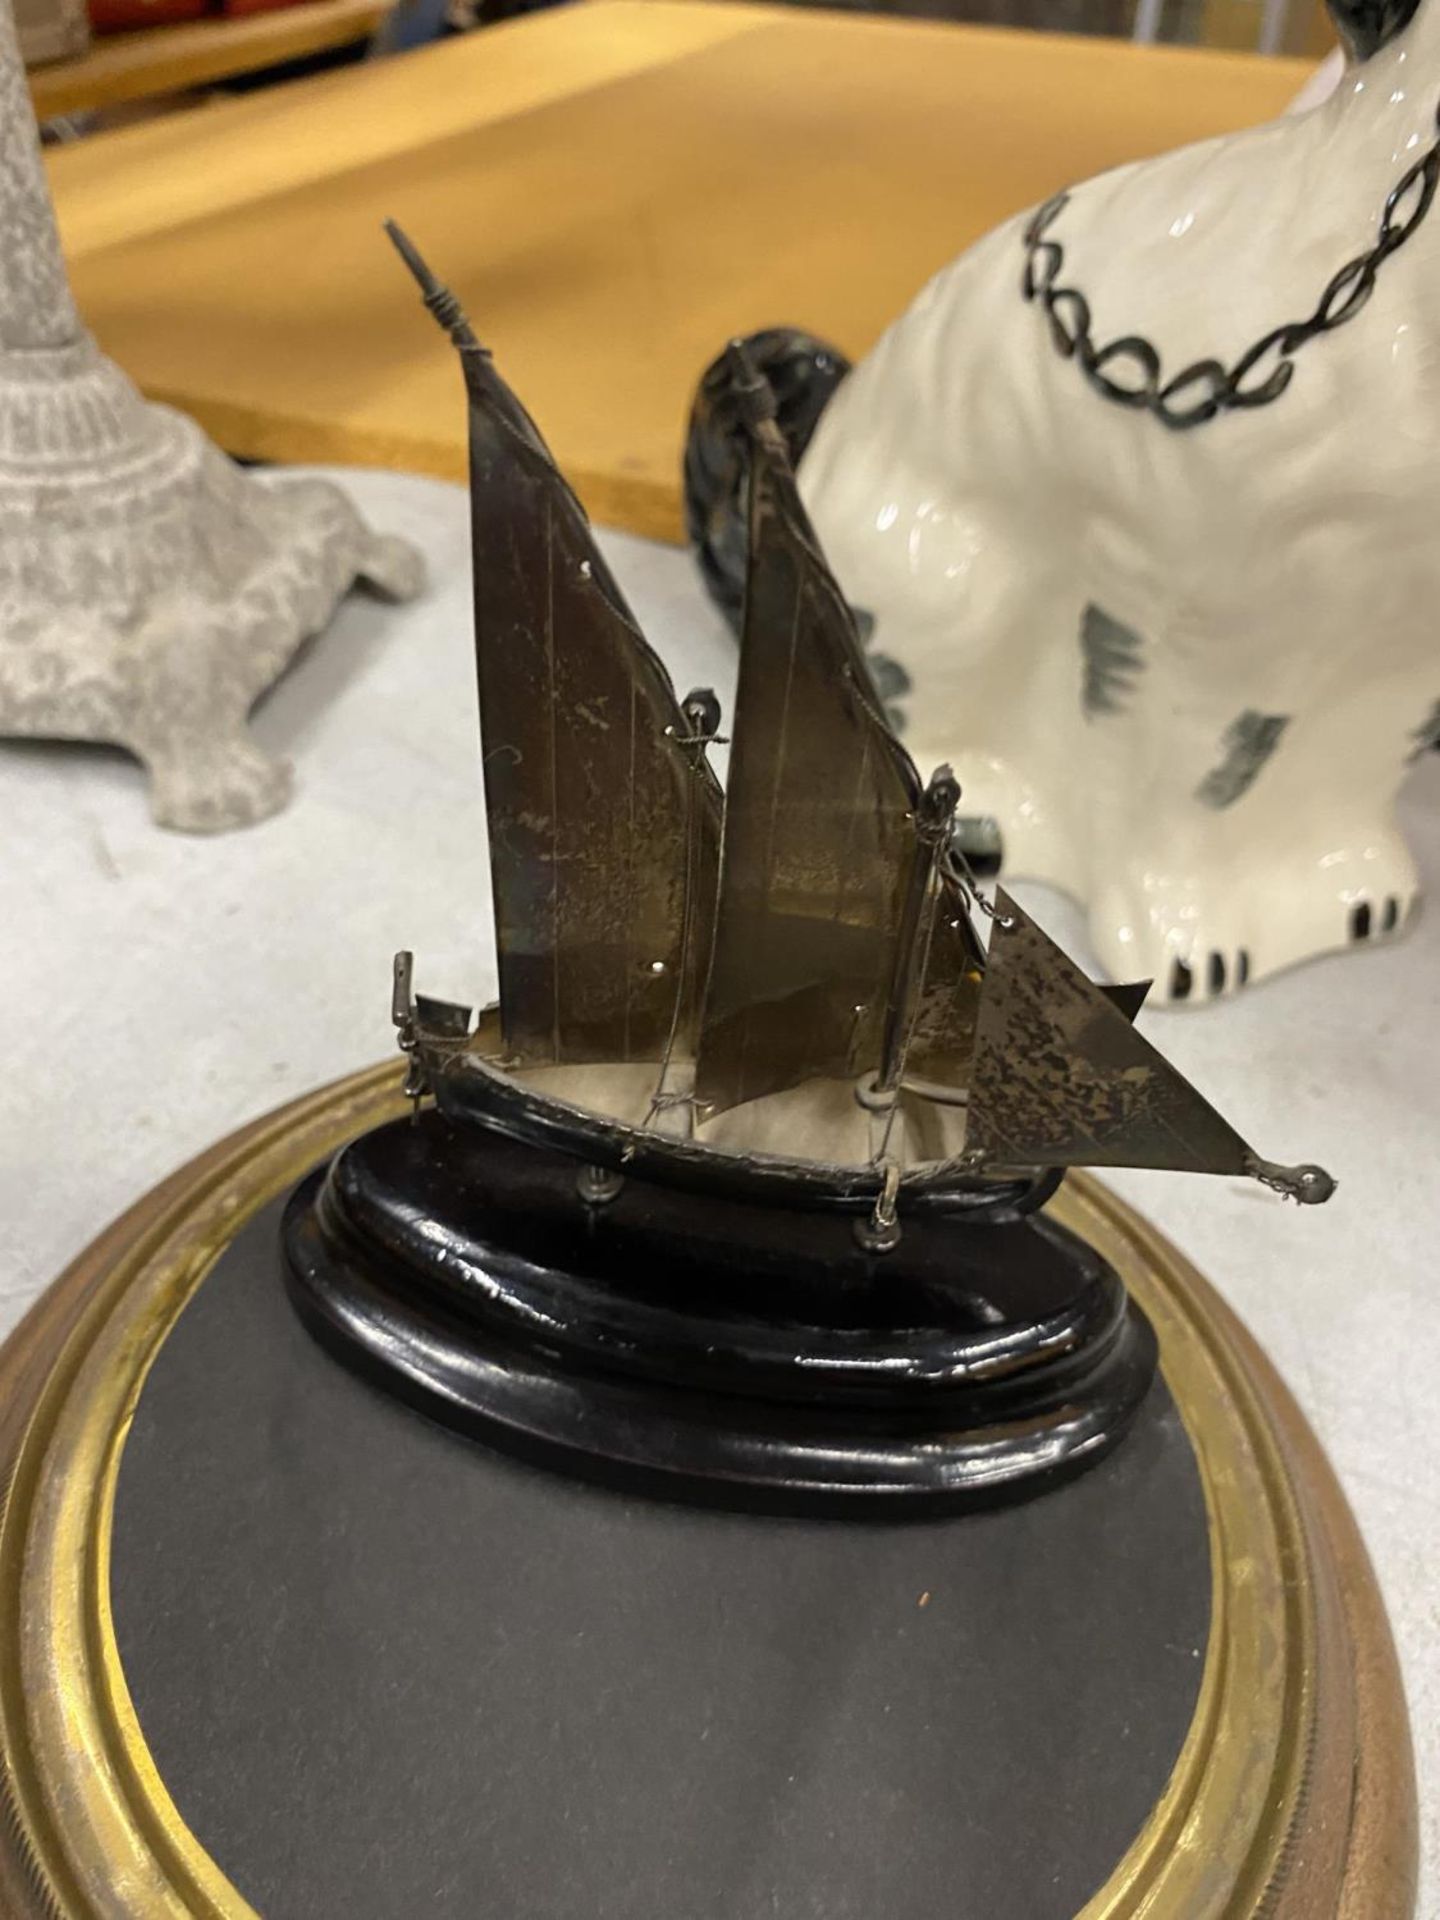 A .925 SILVER SHIP MODEL IN VINTAGE GLASS DOME - Image 2 of 3